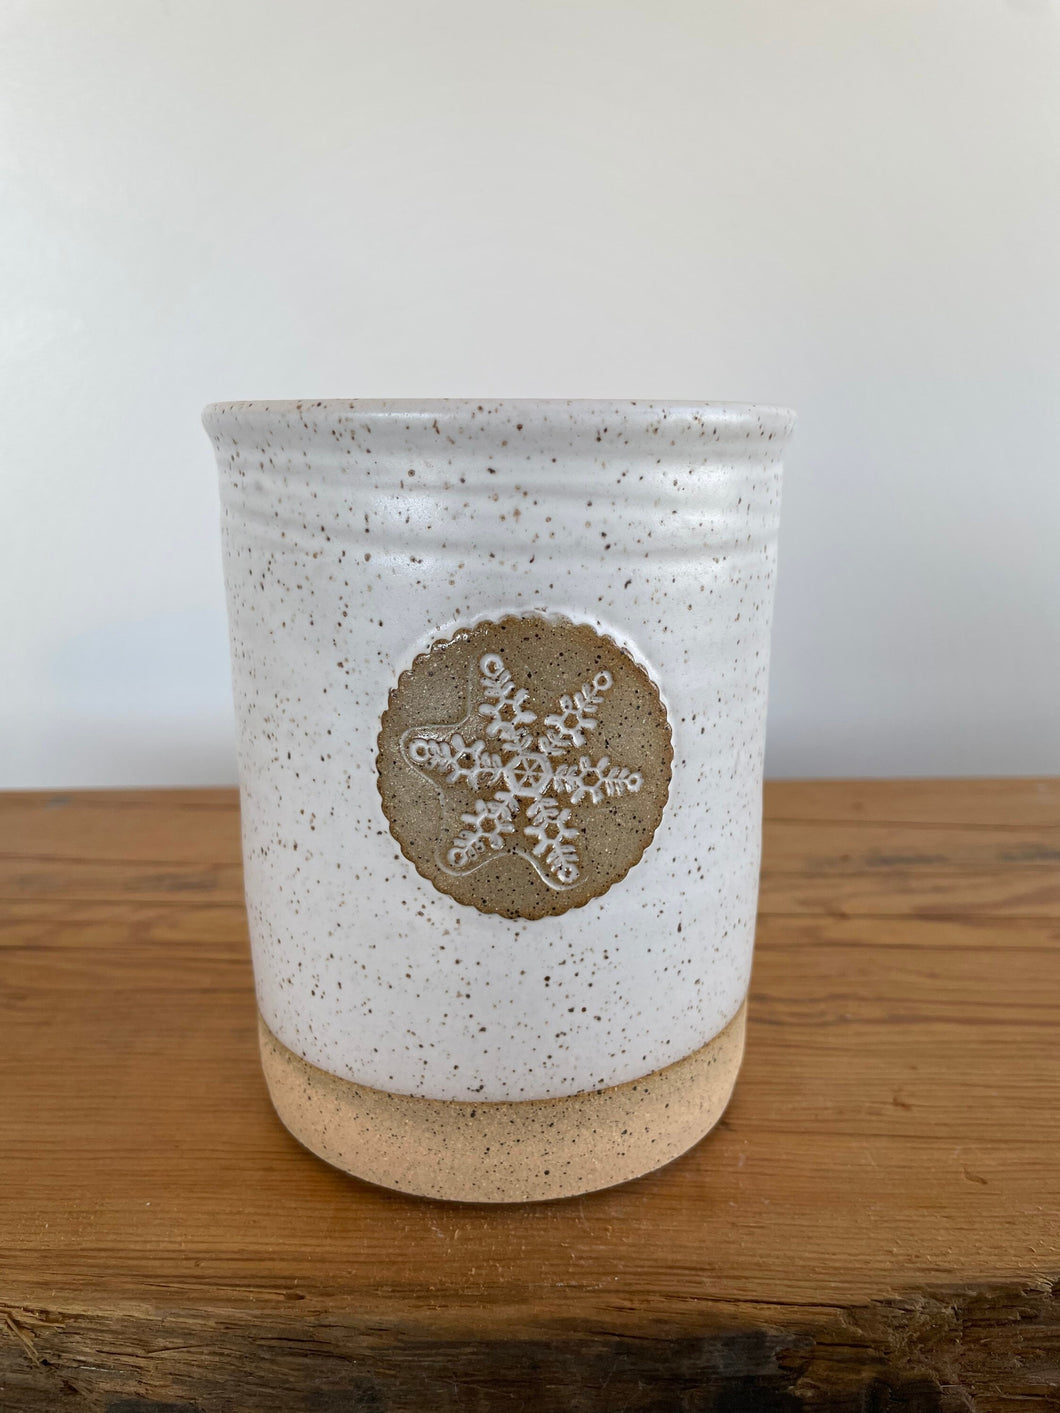 Utensil Crock with Winter Snowflake matte white glaze on speckled stoneware clay.